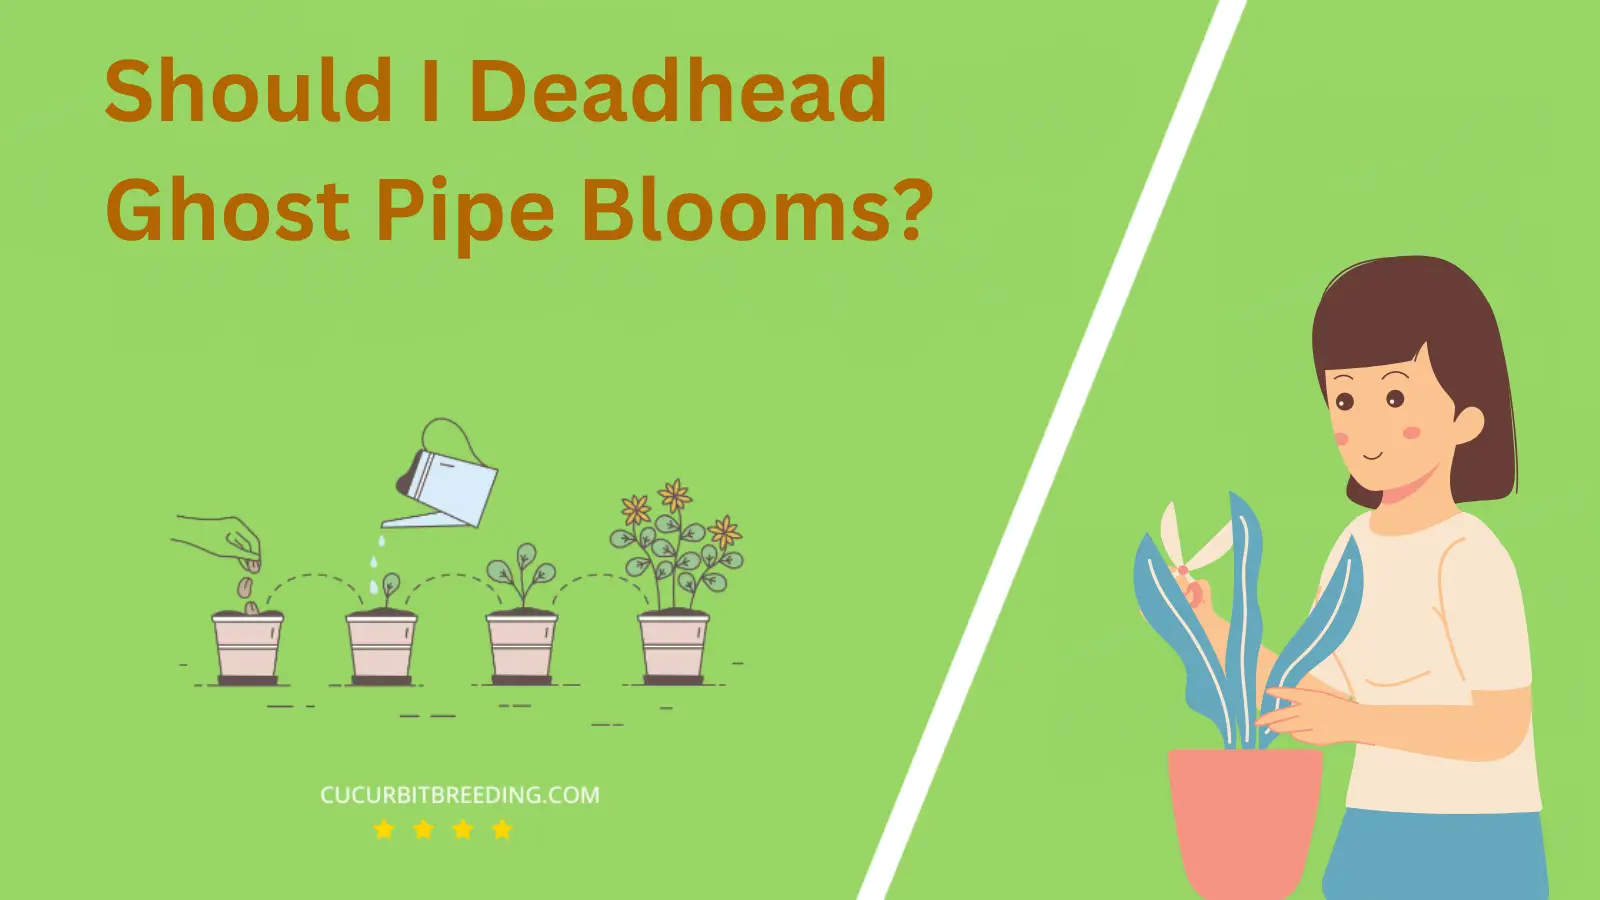 Should I Deadhead Ghost Pipe Blooms?